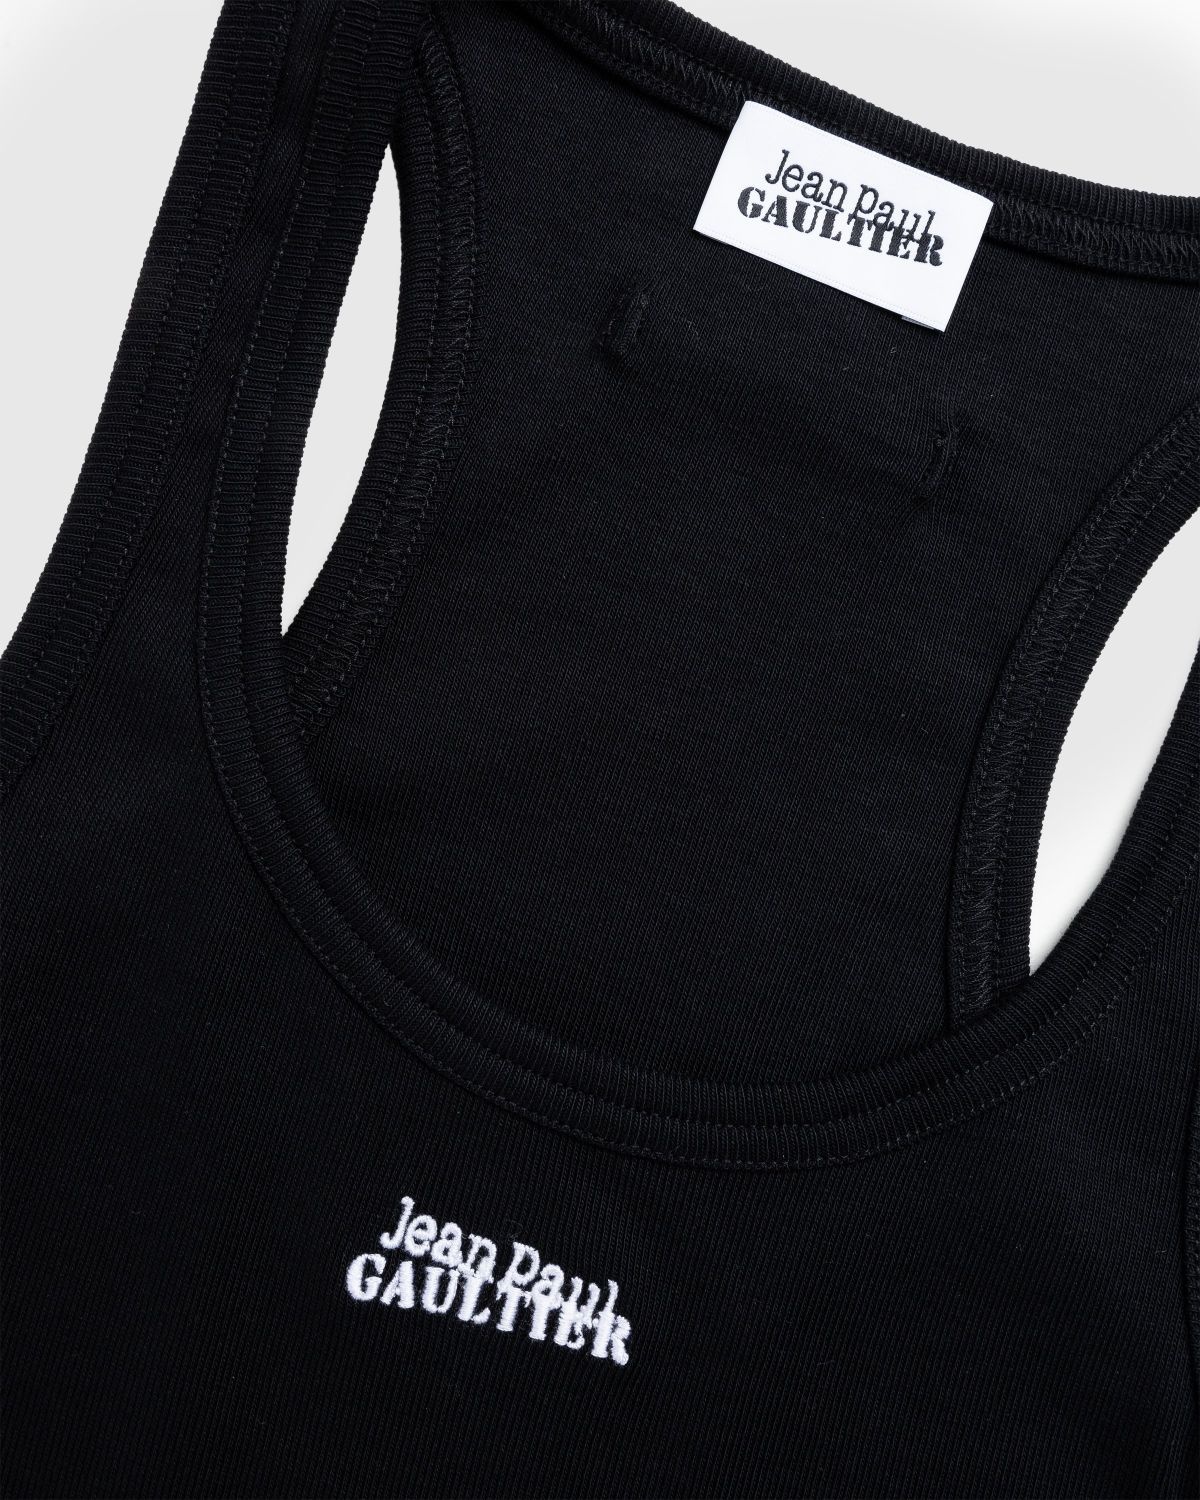 Jean Paul Gaultier – Tanktop With Laced Side Details Black - 6